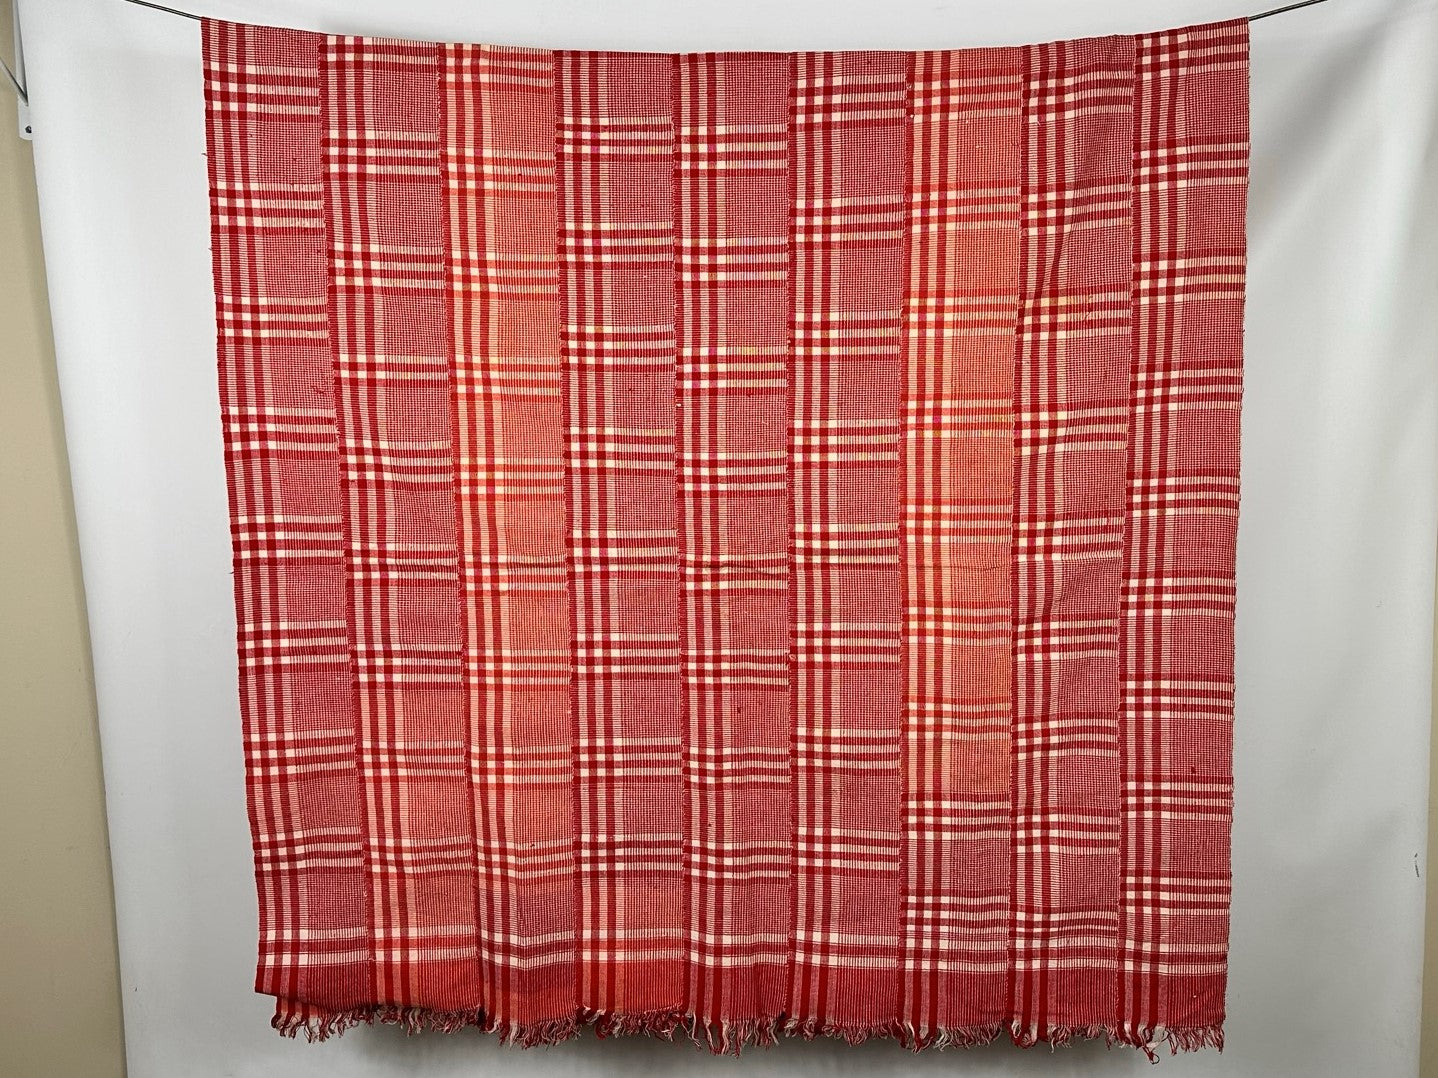 82x45 Red and White Plaid Woven Cloth